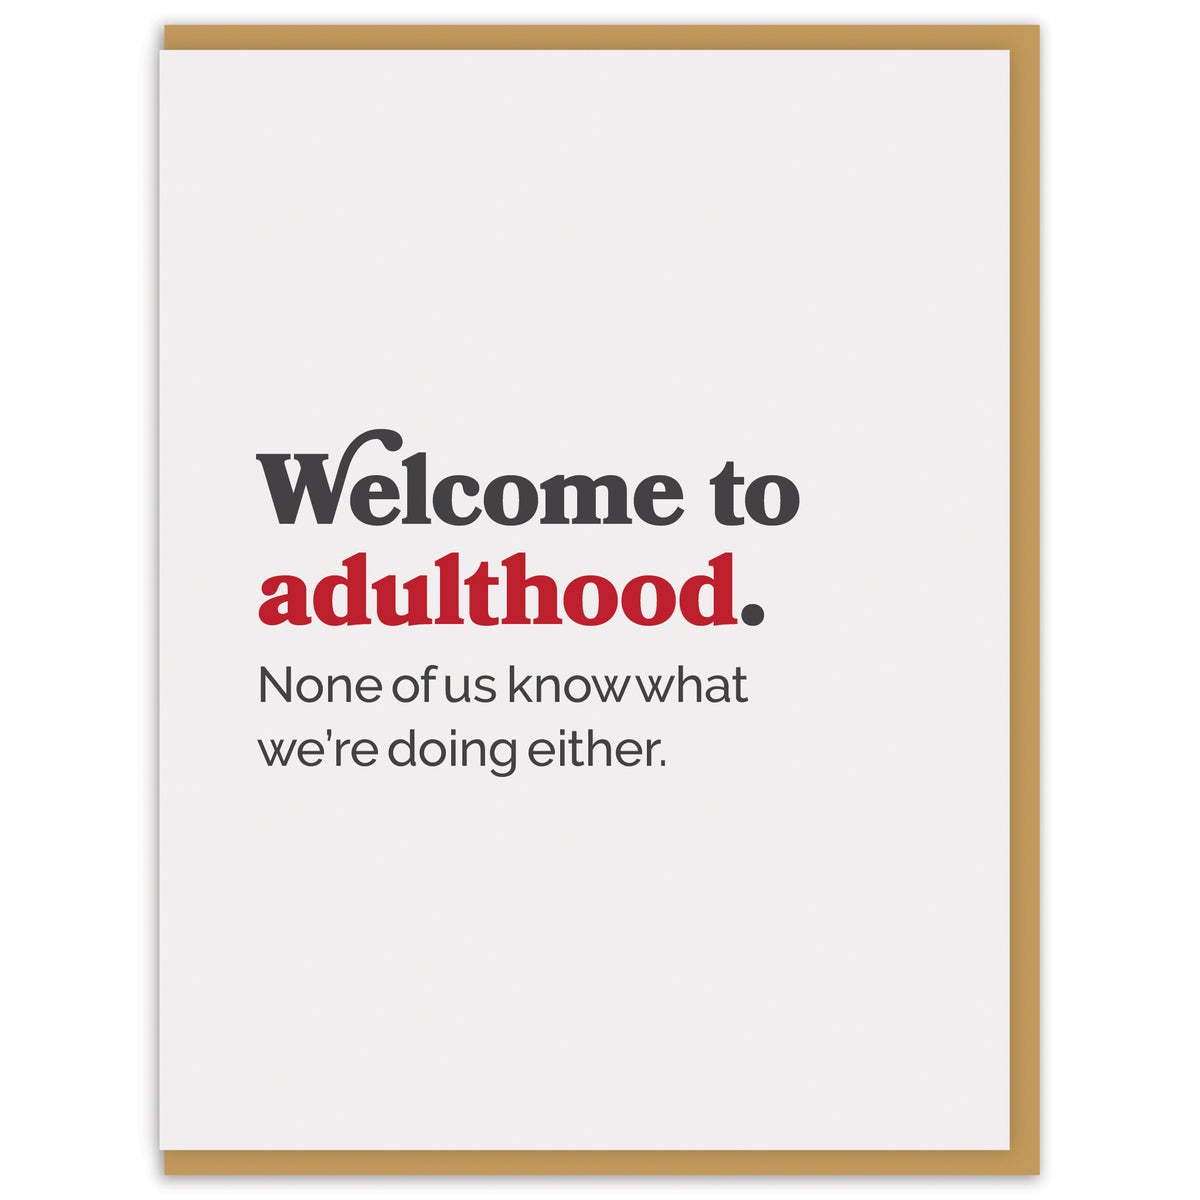 Welcome to adulthood. None of us know what we’re doing either.